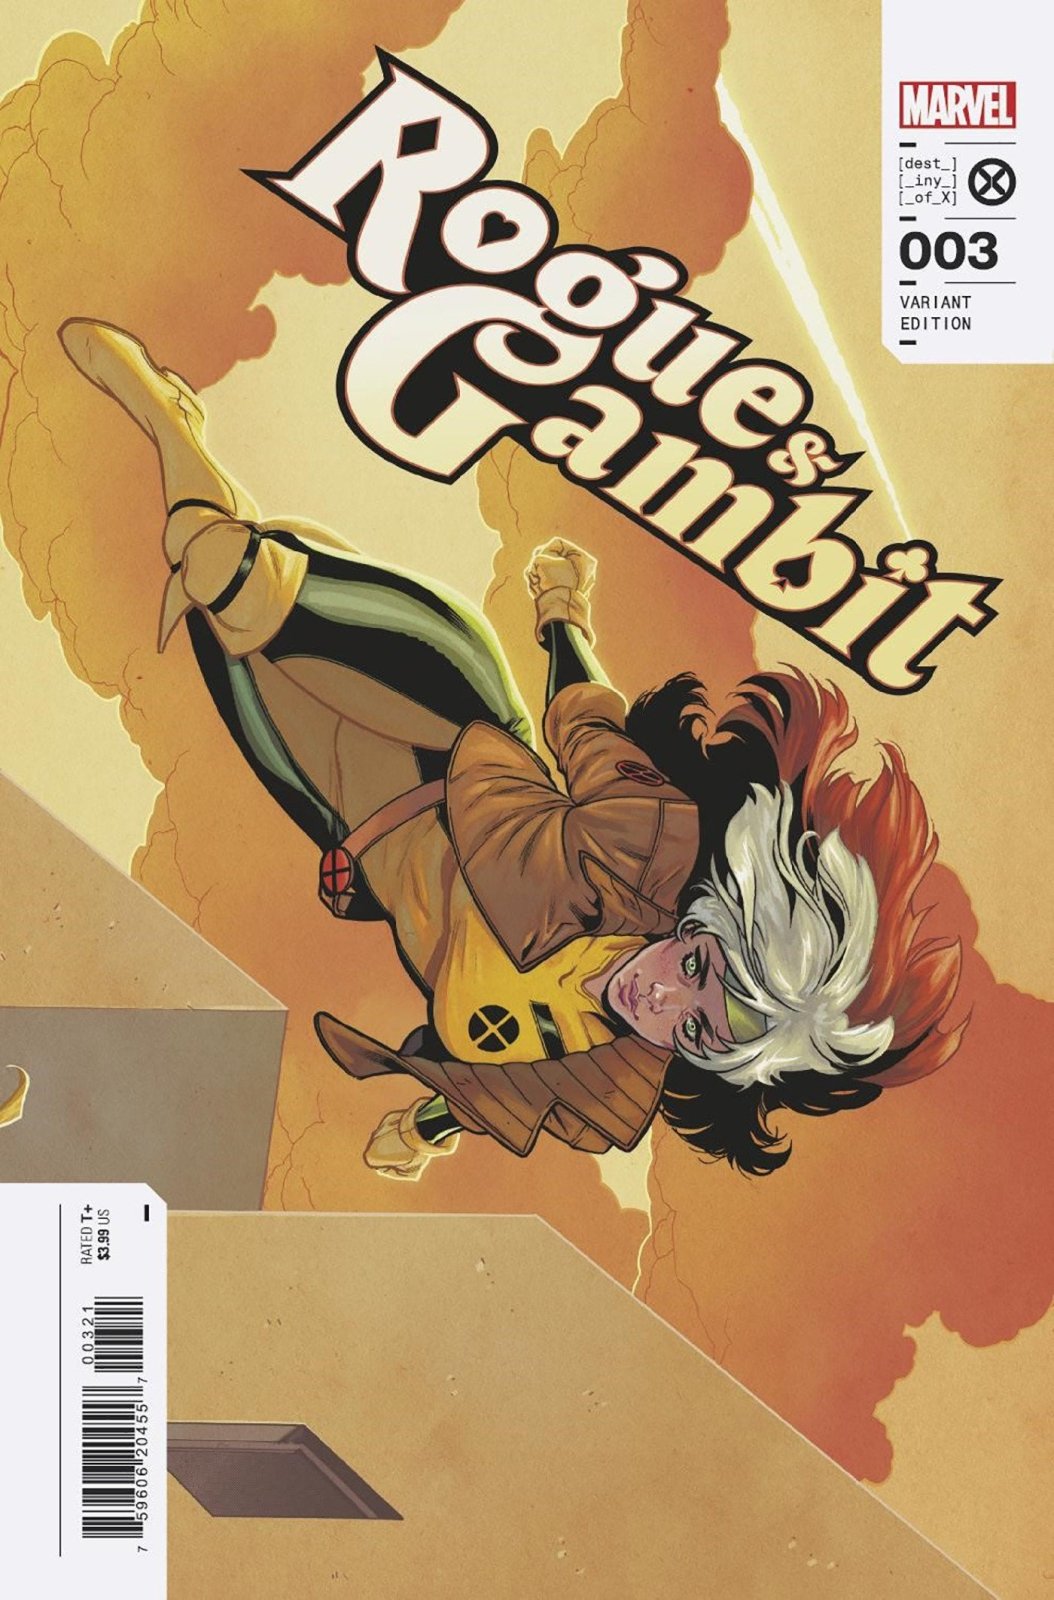 Rogue & Gambit 3 Elena Casagrande Women Of Marvel Variant - The Fourth Place